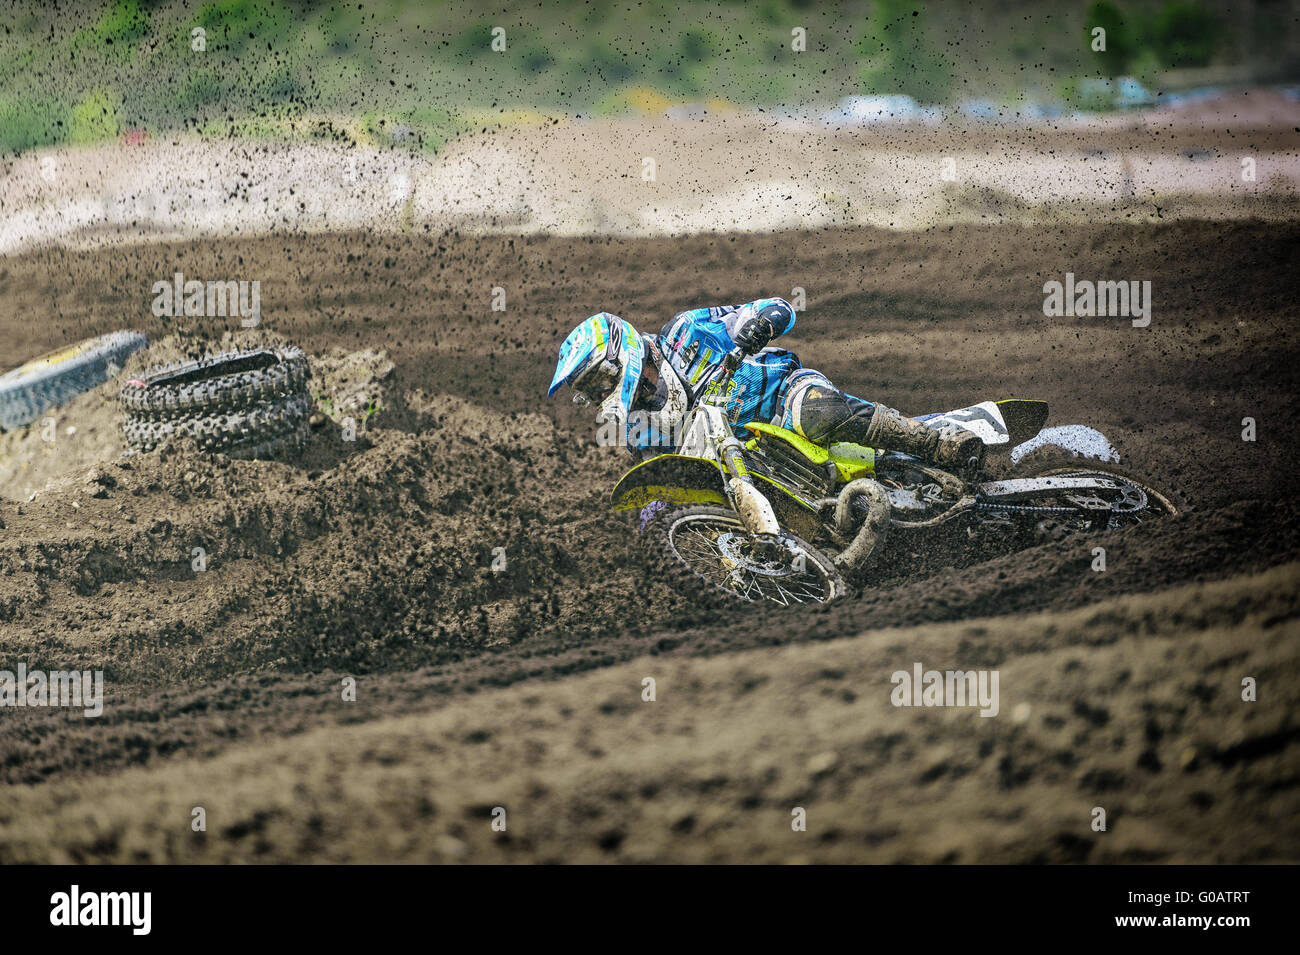 Motocross rider tombe dans une courbe Banque D'Images